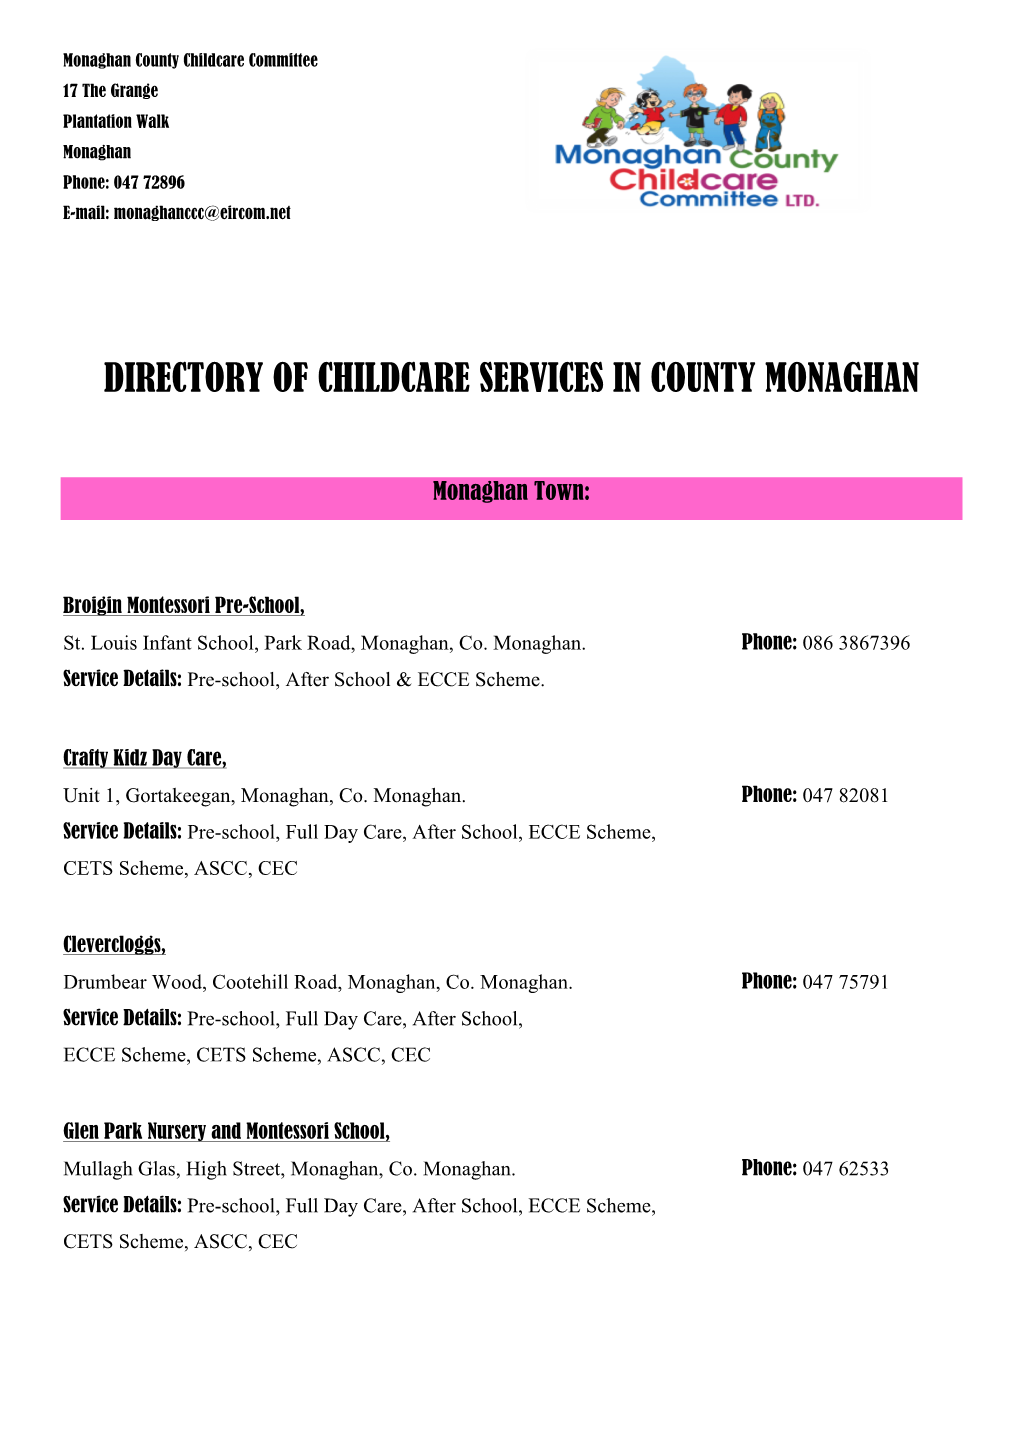 Directory of Childcare Services in County Monaghan